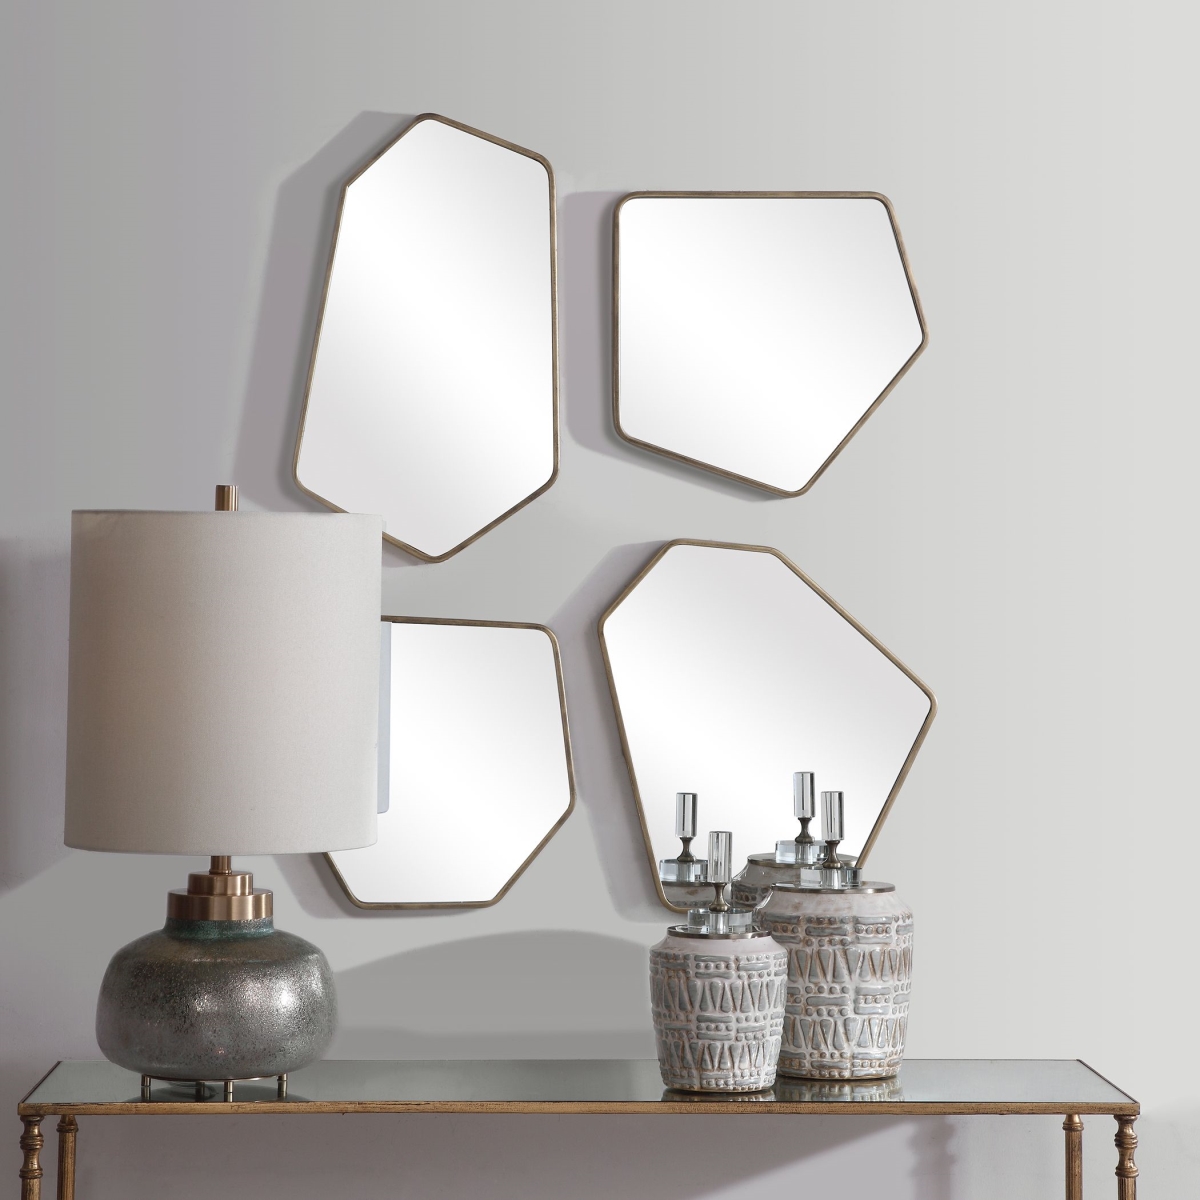 Picture of 212 Main 09616 24.5 x 9 x 20 in. Linneah Modern Mirrors  Set of 4